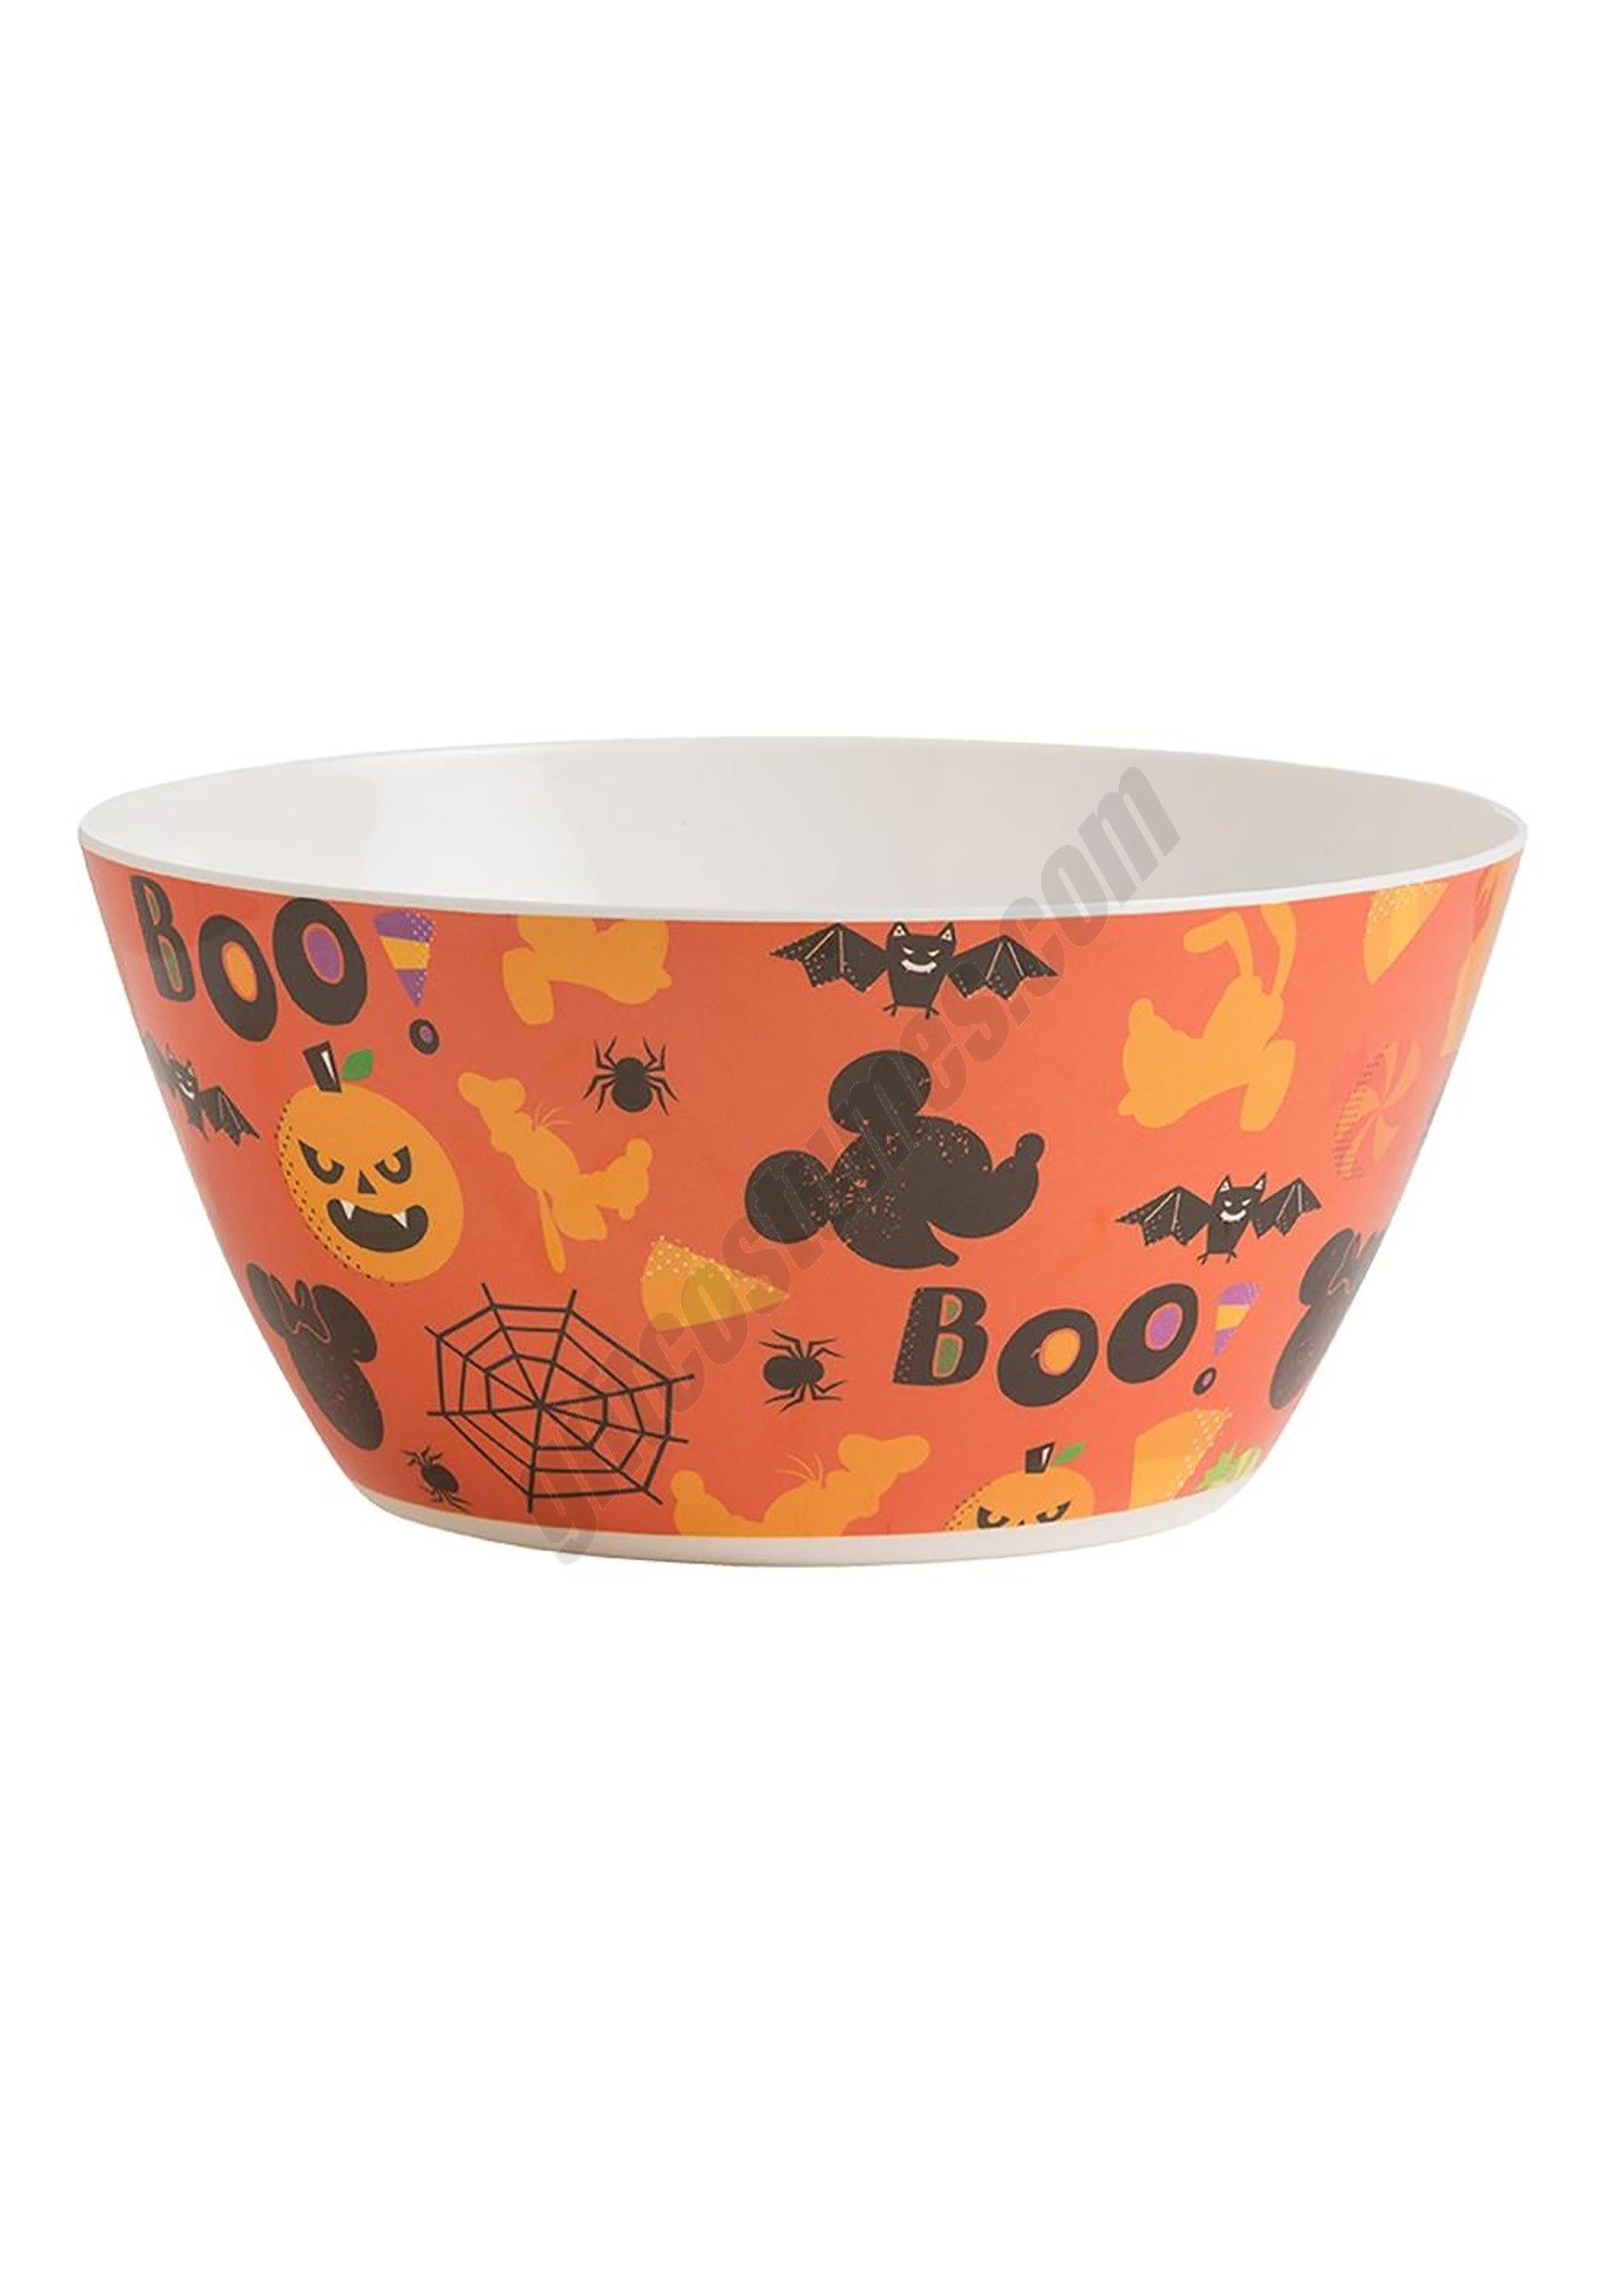 10-inch Disney Halloween Serving Bowl Promotions - 10-inch Disney Halloween Serving Bowl Promotions